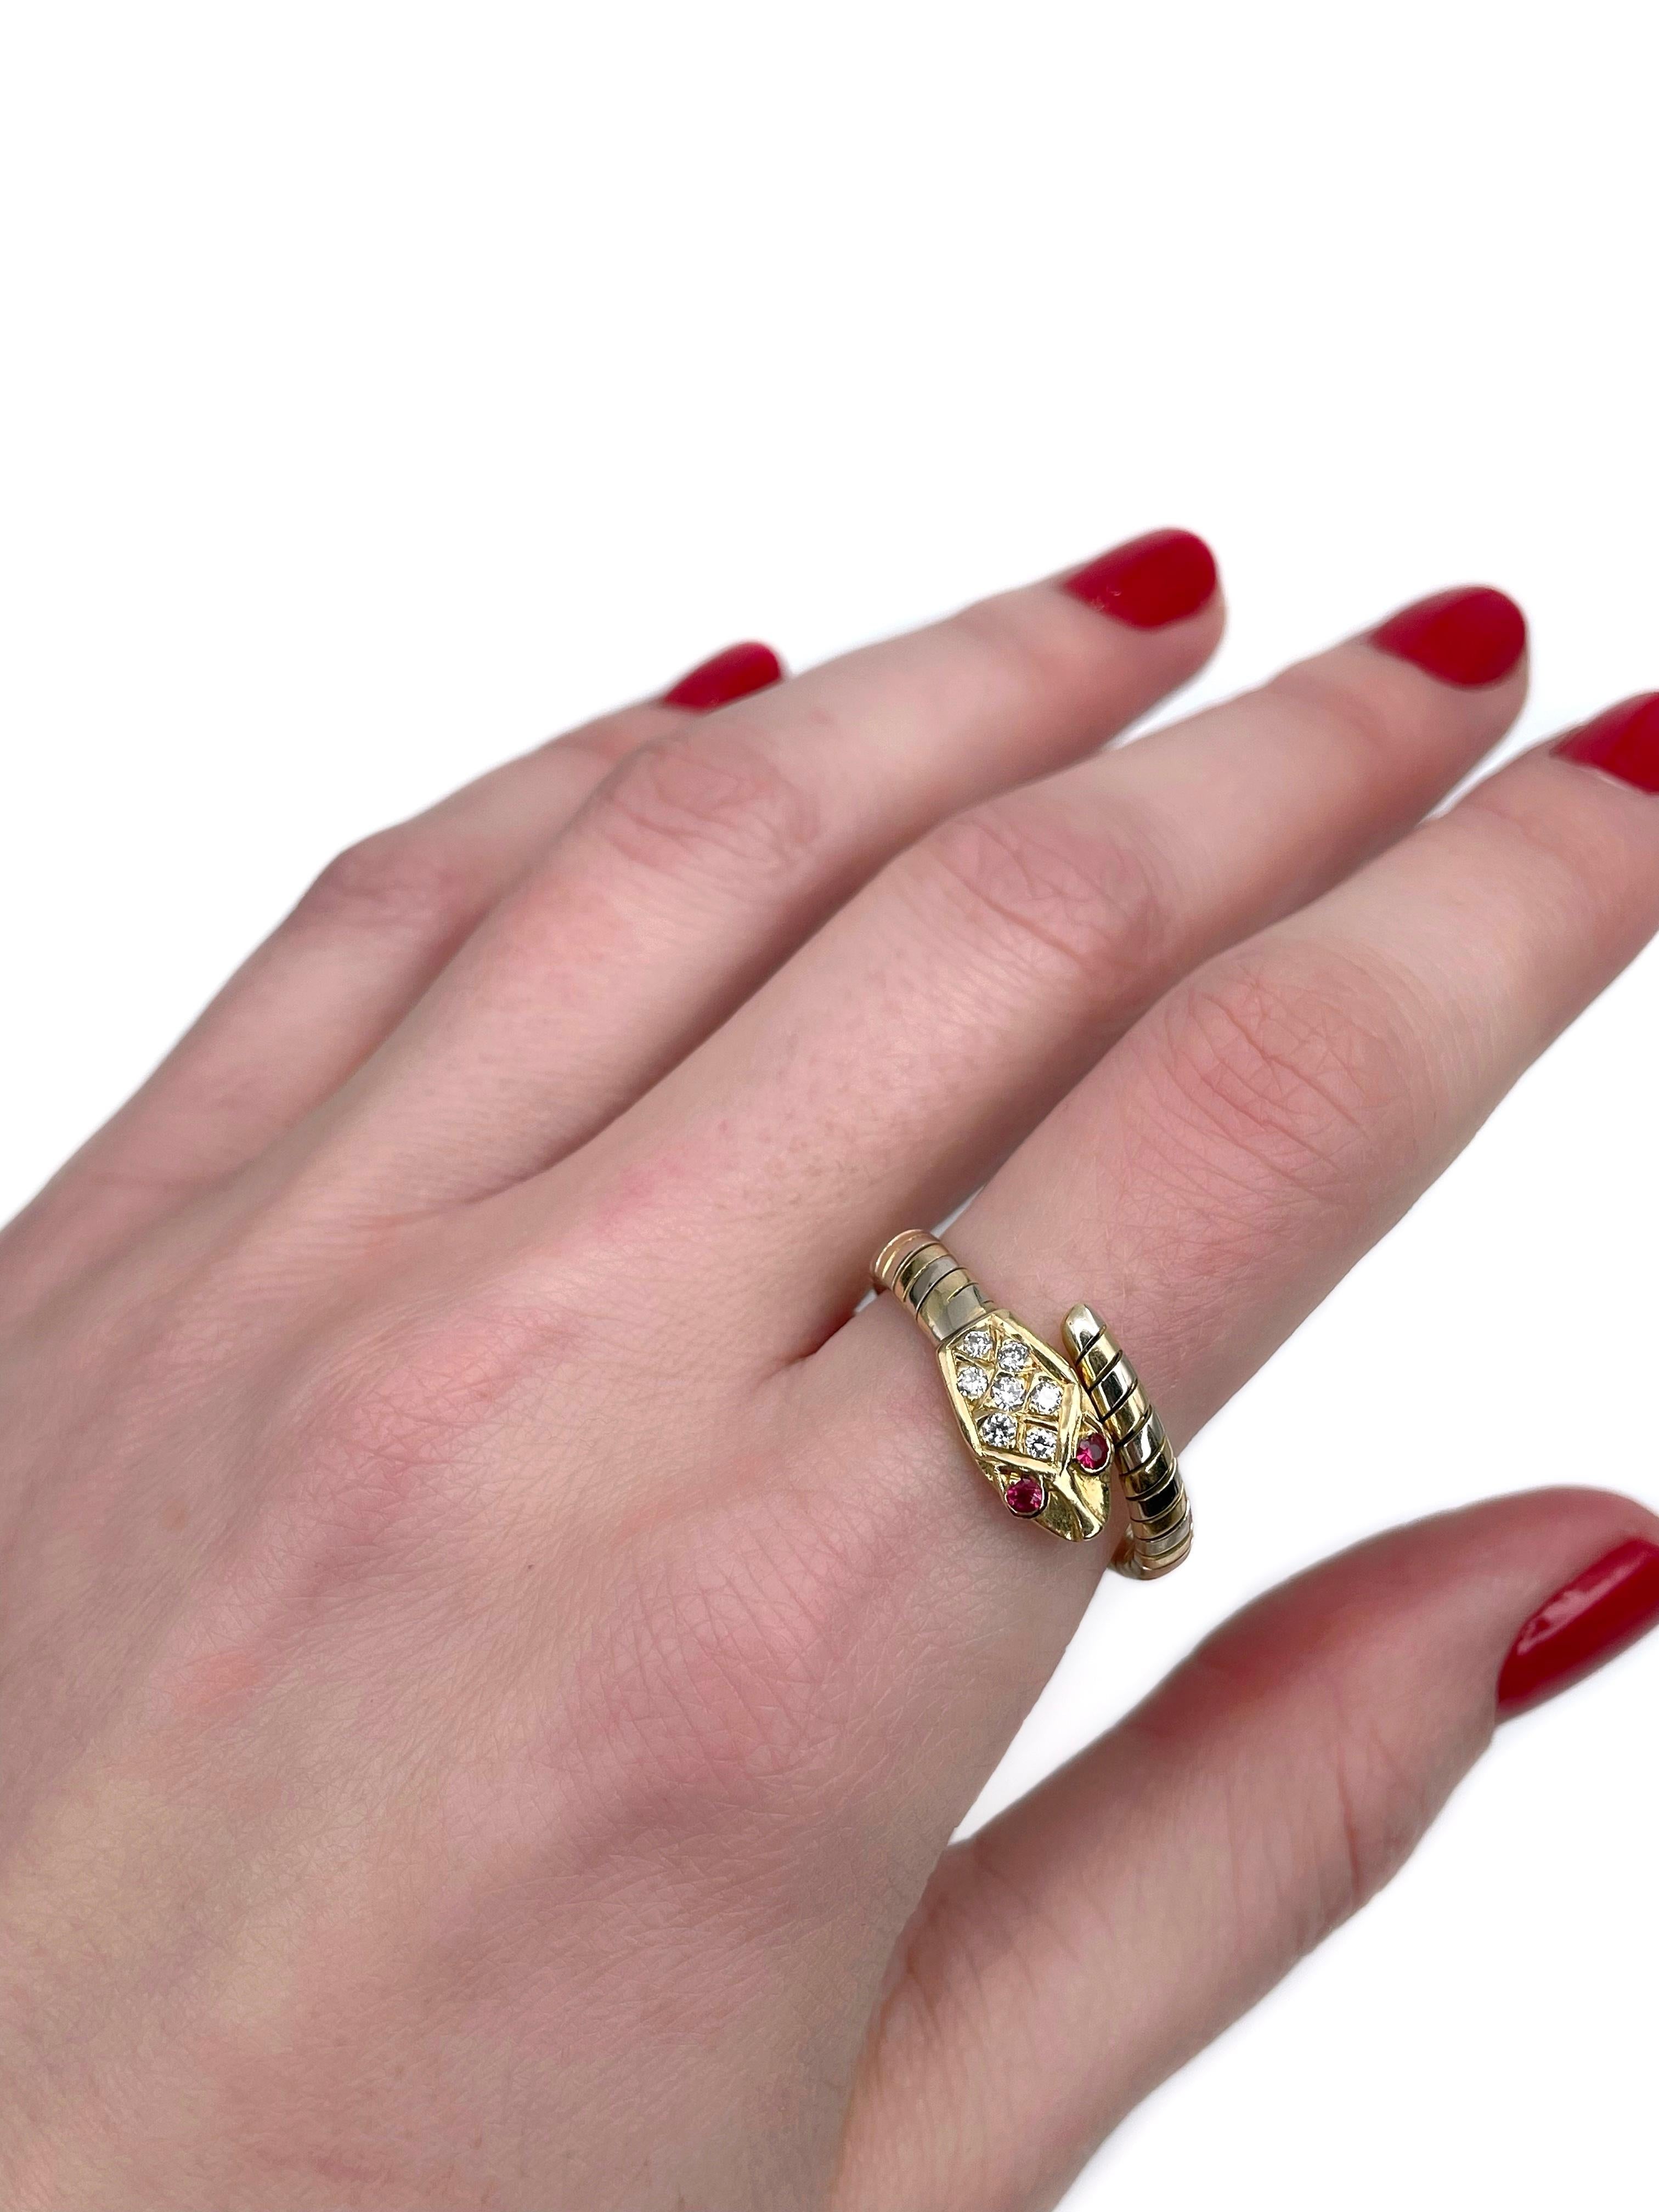 This is a vintage snake ring crafted in 18K bi-colour gold. Circa 1970.

The piece features:
- 7 diamonds (round brilliant cut, TW 0.16ct, RW-W, VS-SI)
 - 2 rubies (round cut, TW 0.08ct, slpR 4/4, VS) 

The ring is flexible. This let it adjusting to